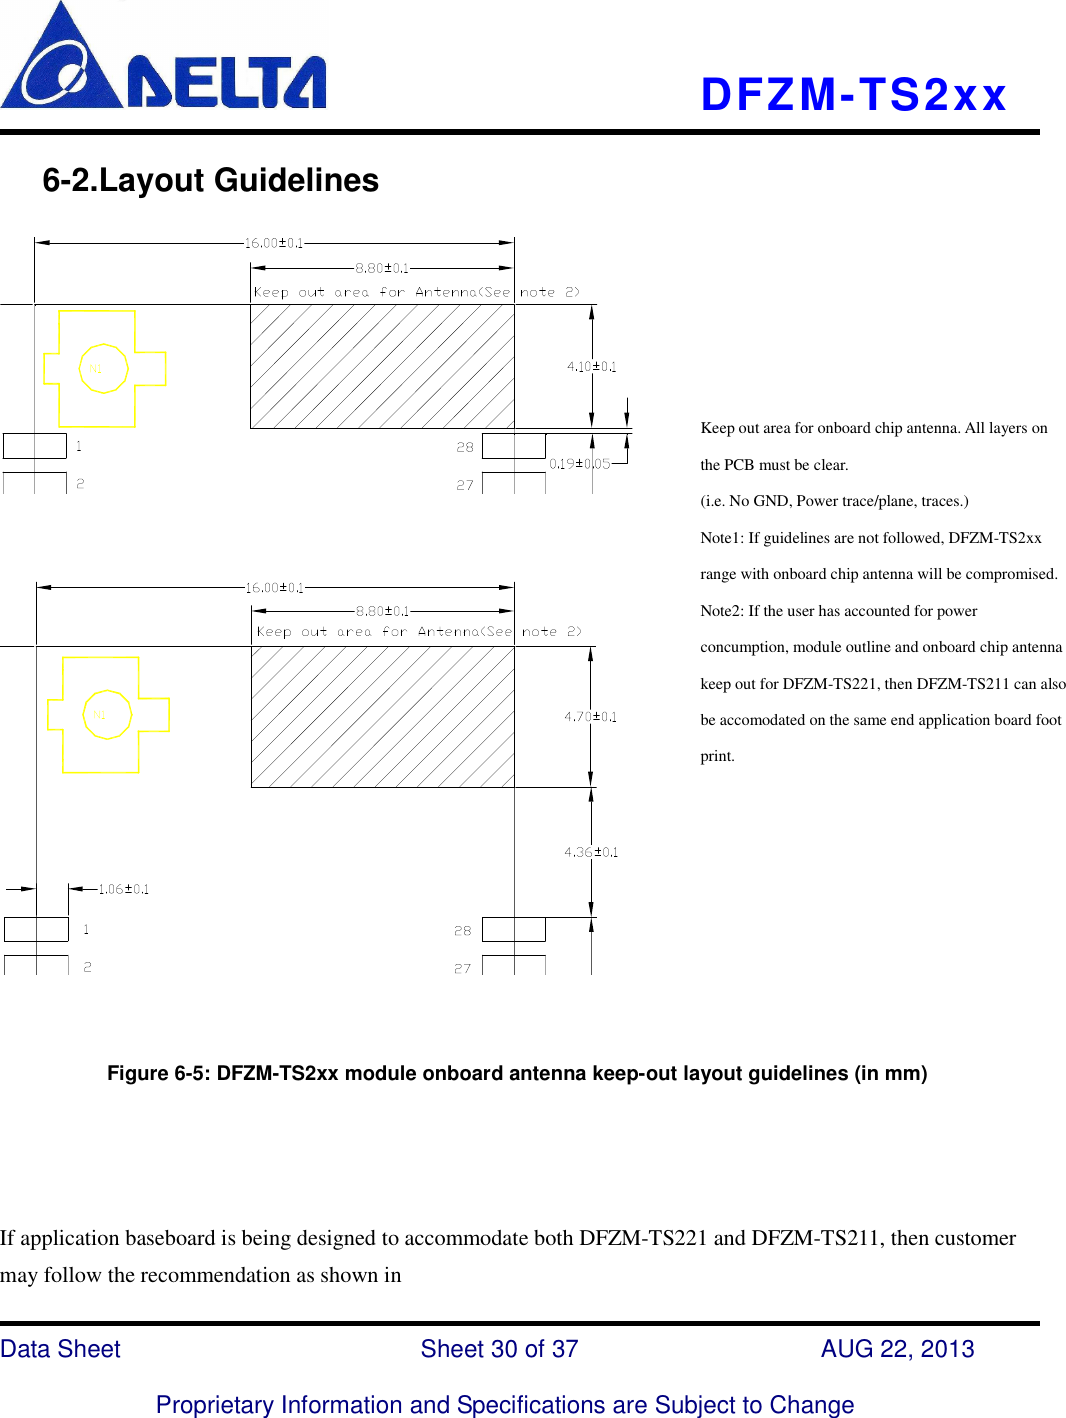    DFZM-TS2xx   Data Sheet                              Sheet 30 of 37                    AUG 22, 2013  Proprietary Information and Specifications are Subject to Change      6-2.Layout Guidelines                   Figure 6-5: DFZM-TS2xx module onboard antenna keep-out layout guidelines (in mm)      If application baseboard is being designed to accommodate both DFZM-TS221 and DFZM-TS211, then customer may follow the recommendation as shown in Keep out area for onboard chip antenna. All layers on the PCB must be clear. (i.e. No GND, Power trace/plane, traces.) Note1: If guidelines are not followed, DFZM-TS2xx range with onboard chip antenna will be compromised. Note2: If the user has accounted for power concumption, module outline and onboard chip antenna keep out for DFZM-TS221, then DFZM-TS211 can also be accomodated on the same end application board foot print. 